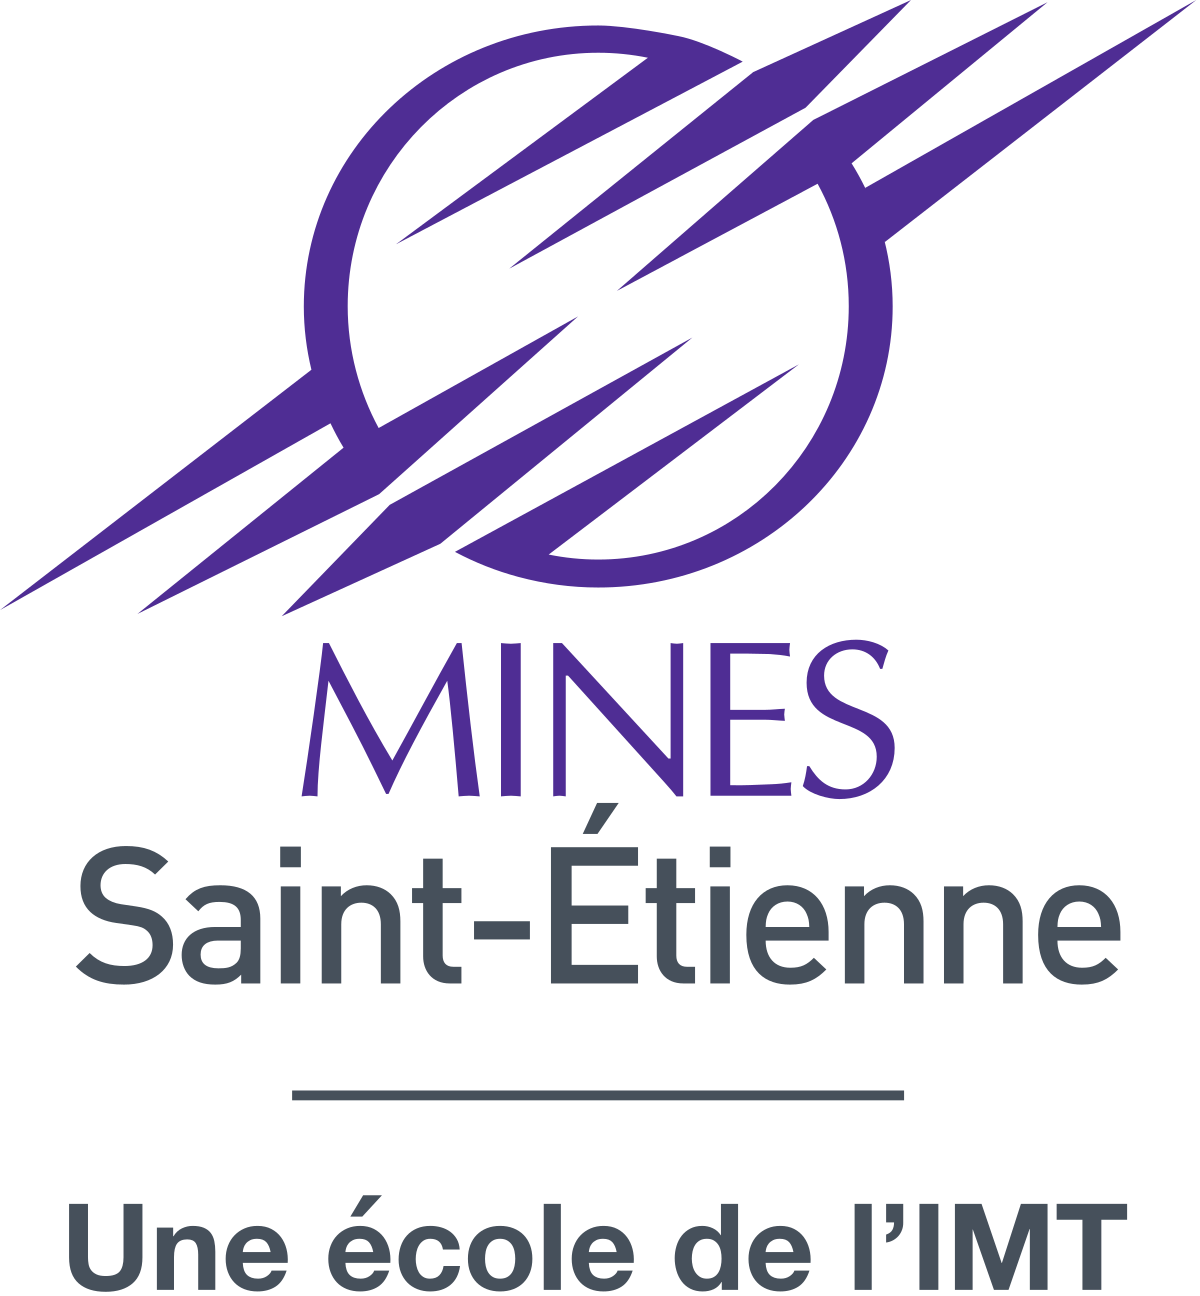 Graduate Engineering School and Research Institute (MINES Saint-Étienne)